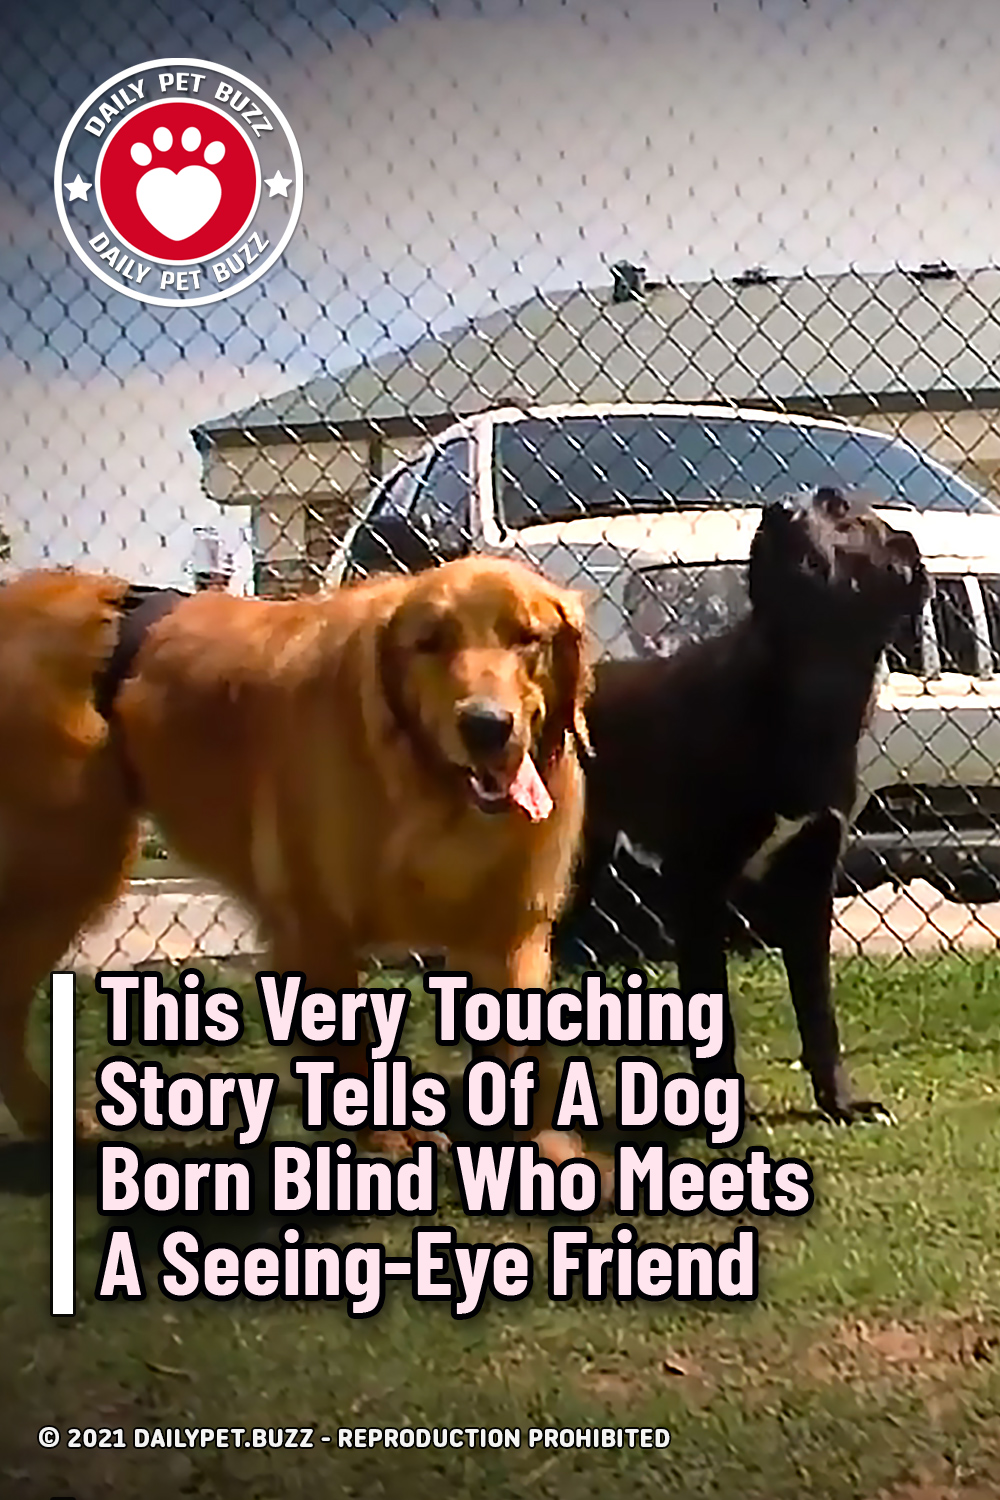 This Very Touching Story Tells Of A Dog Born Blind Who Meets A Seeing-Eye Friend